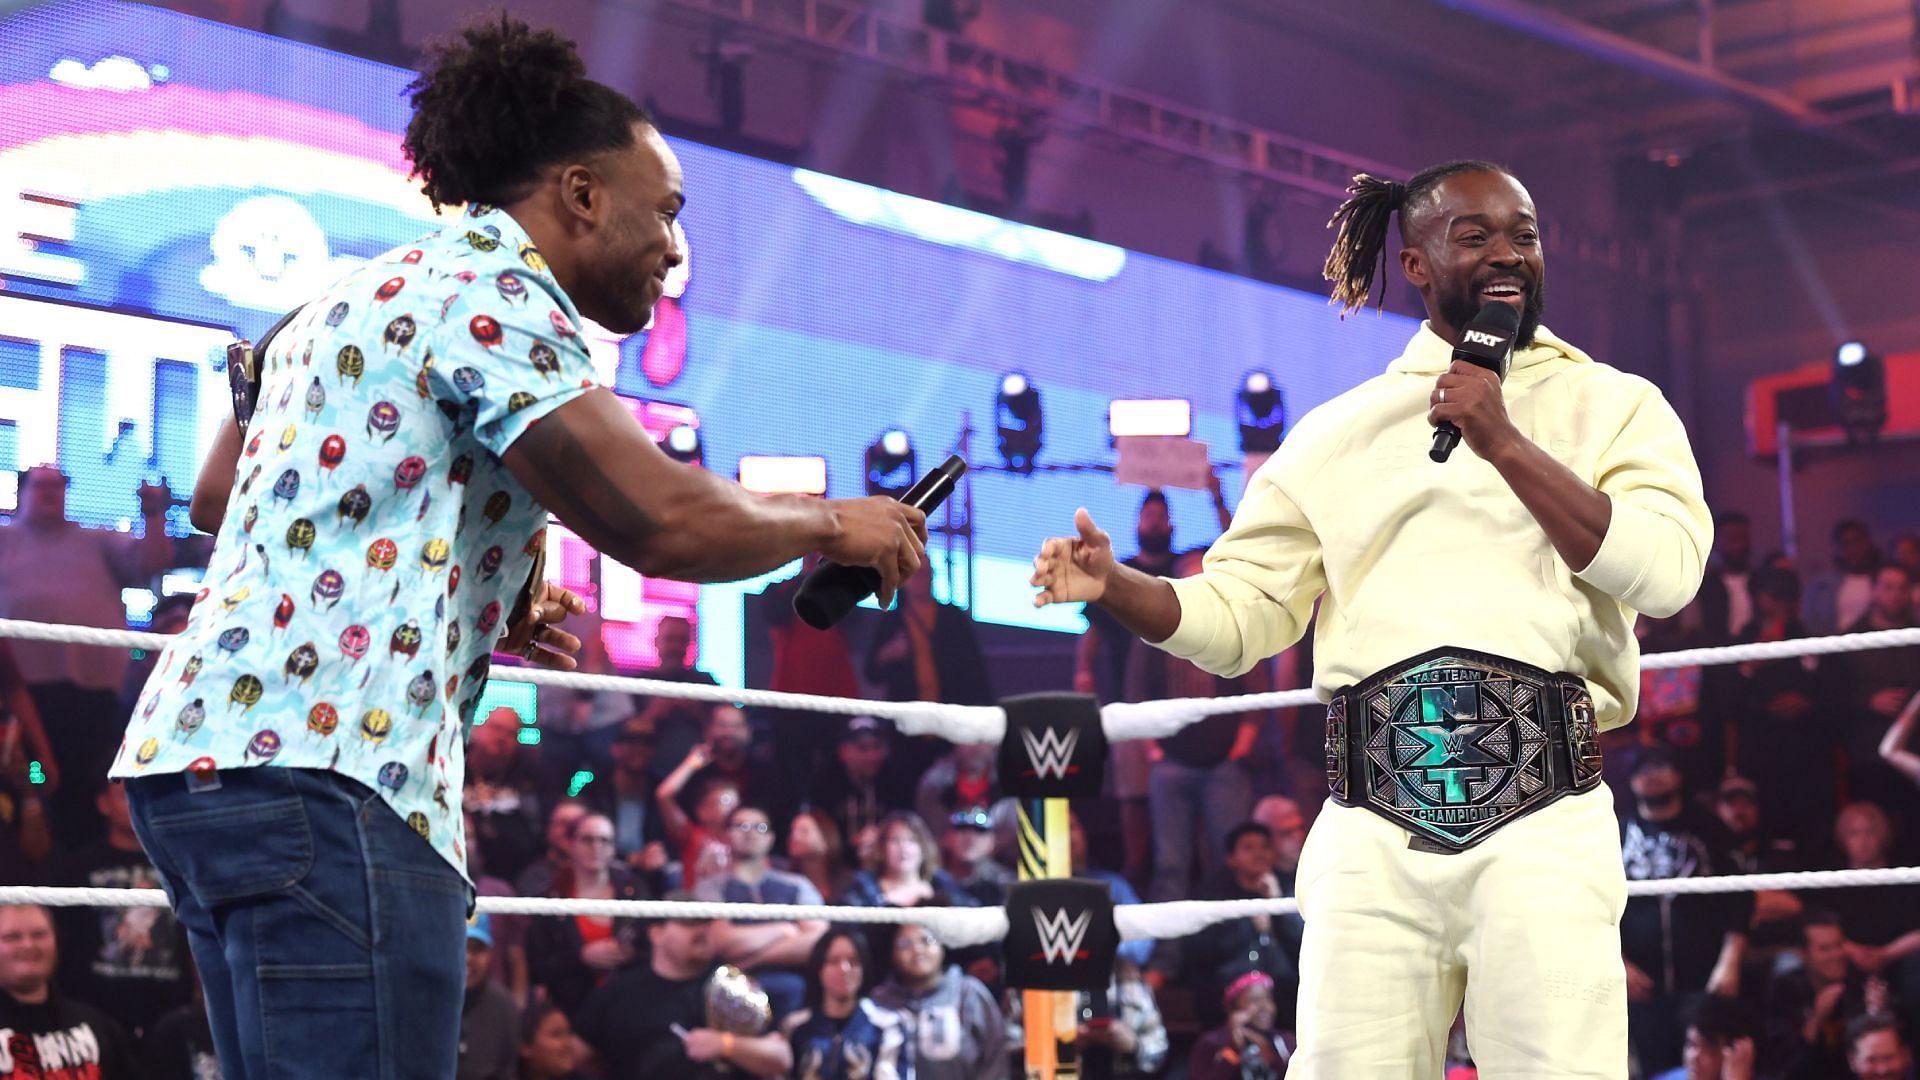 The New Day are tag team champions